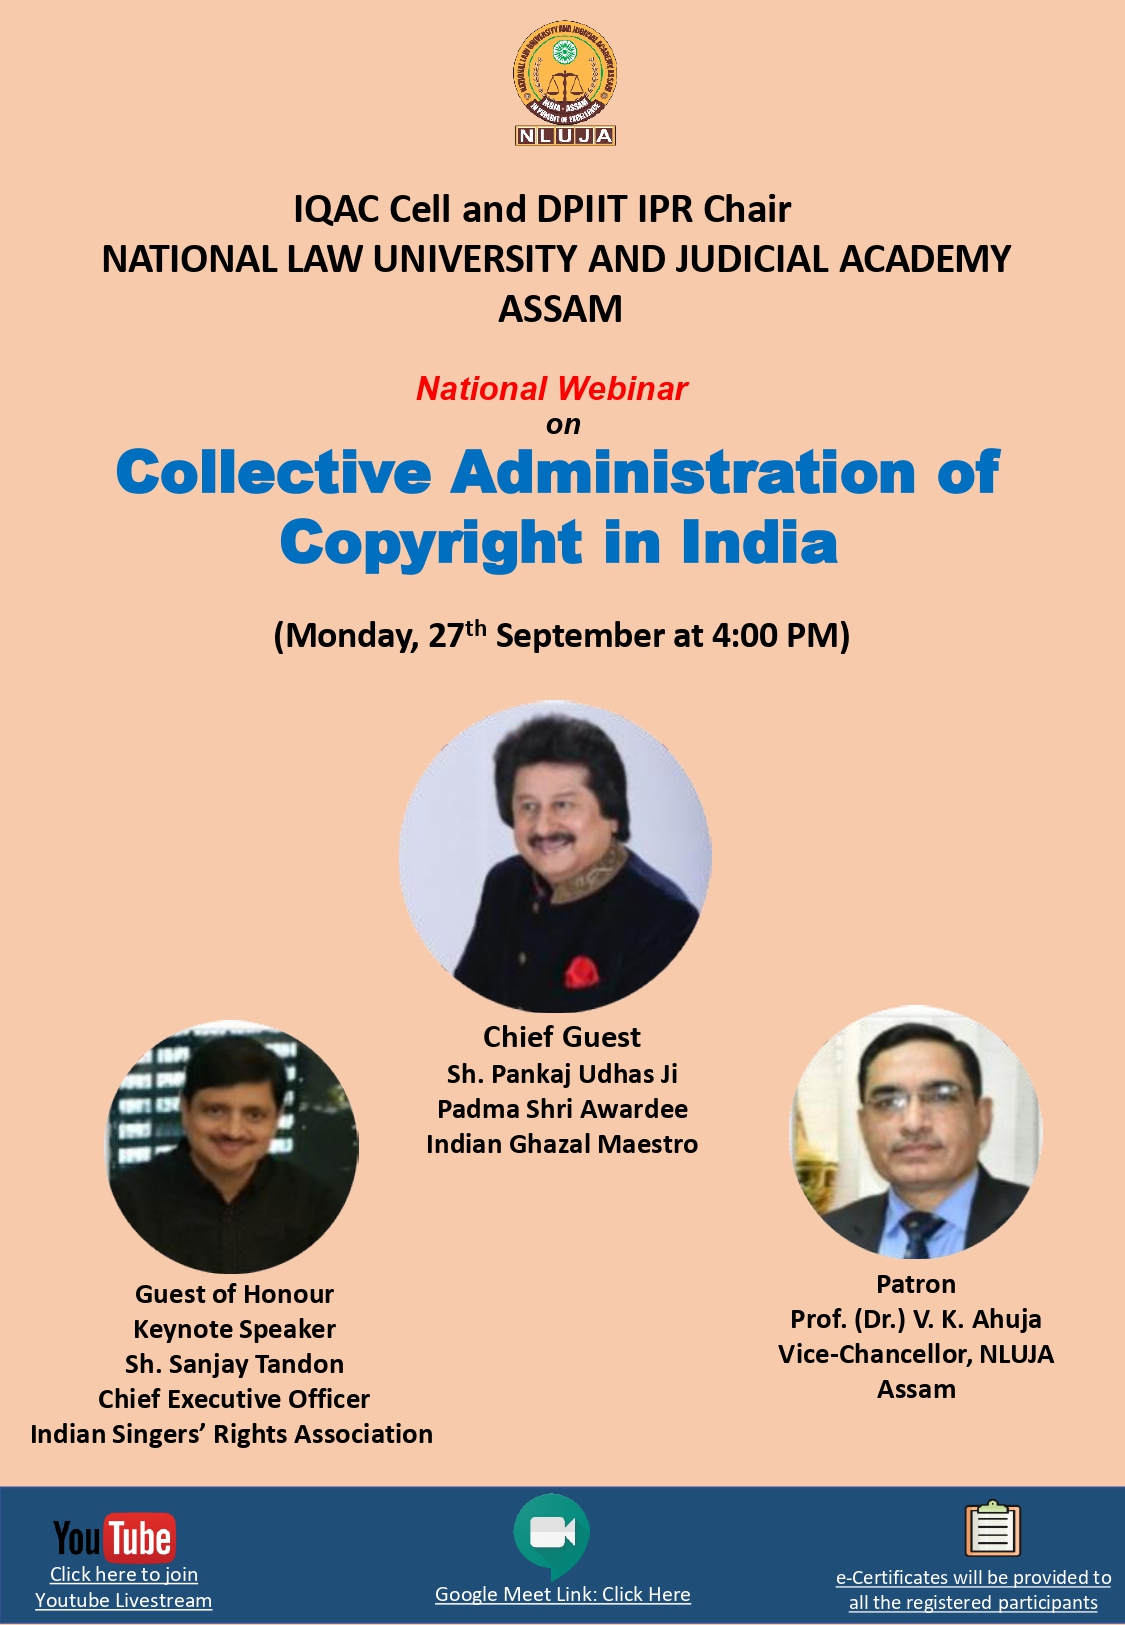 Webinar on “Collective Administration of Copyright in India” by the theDPIIT-IPR Chair &IQAC Cell of National Law University and Judicial AcademyAssam [27th September 2021]